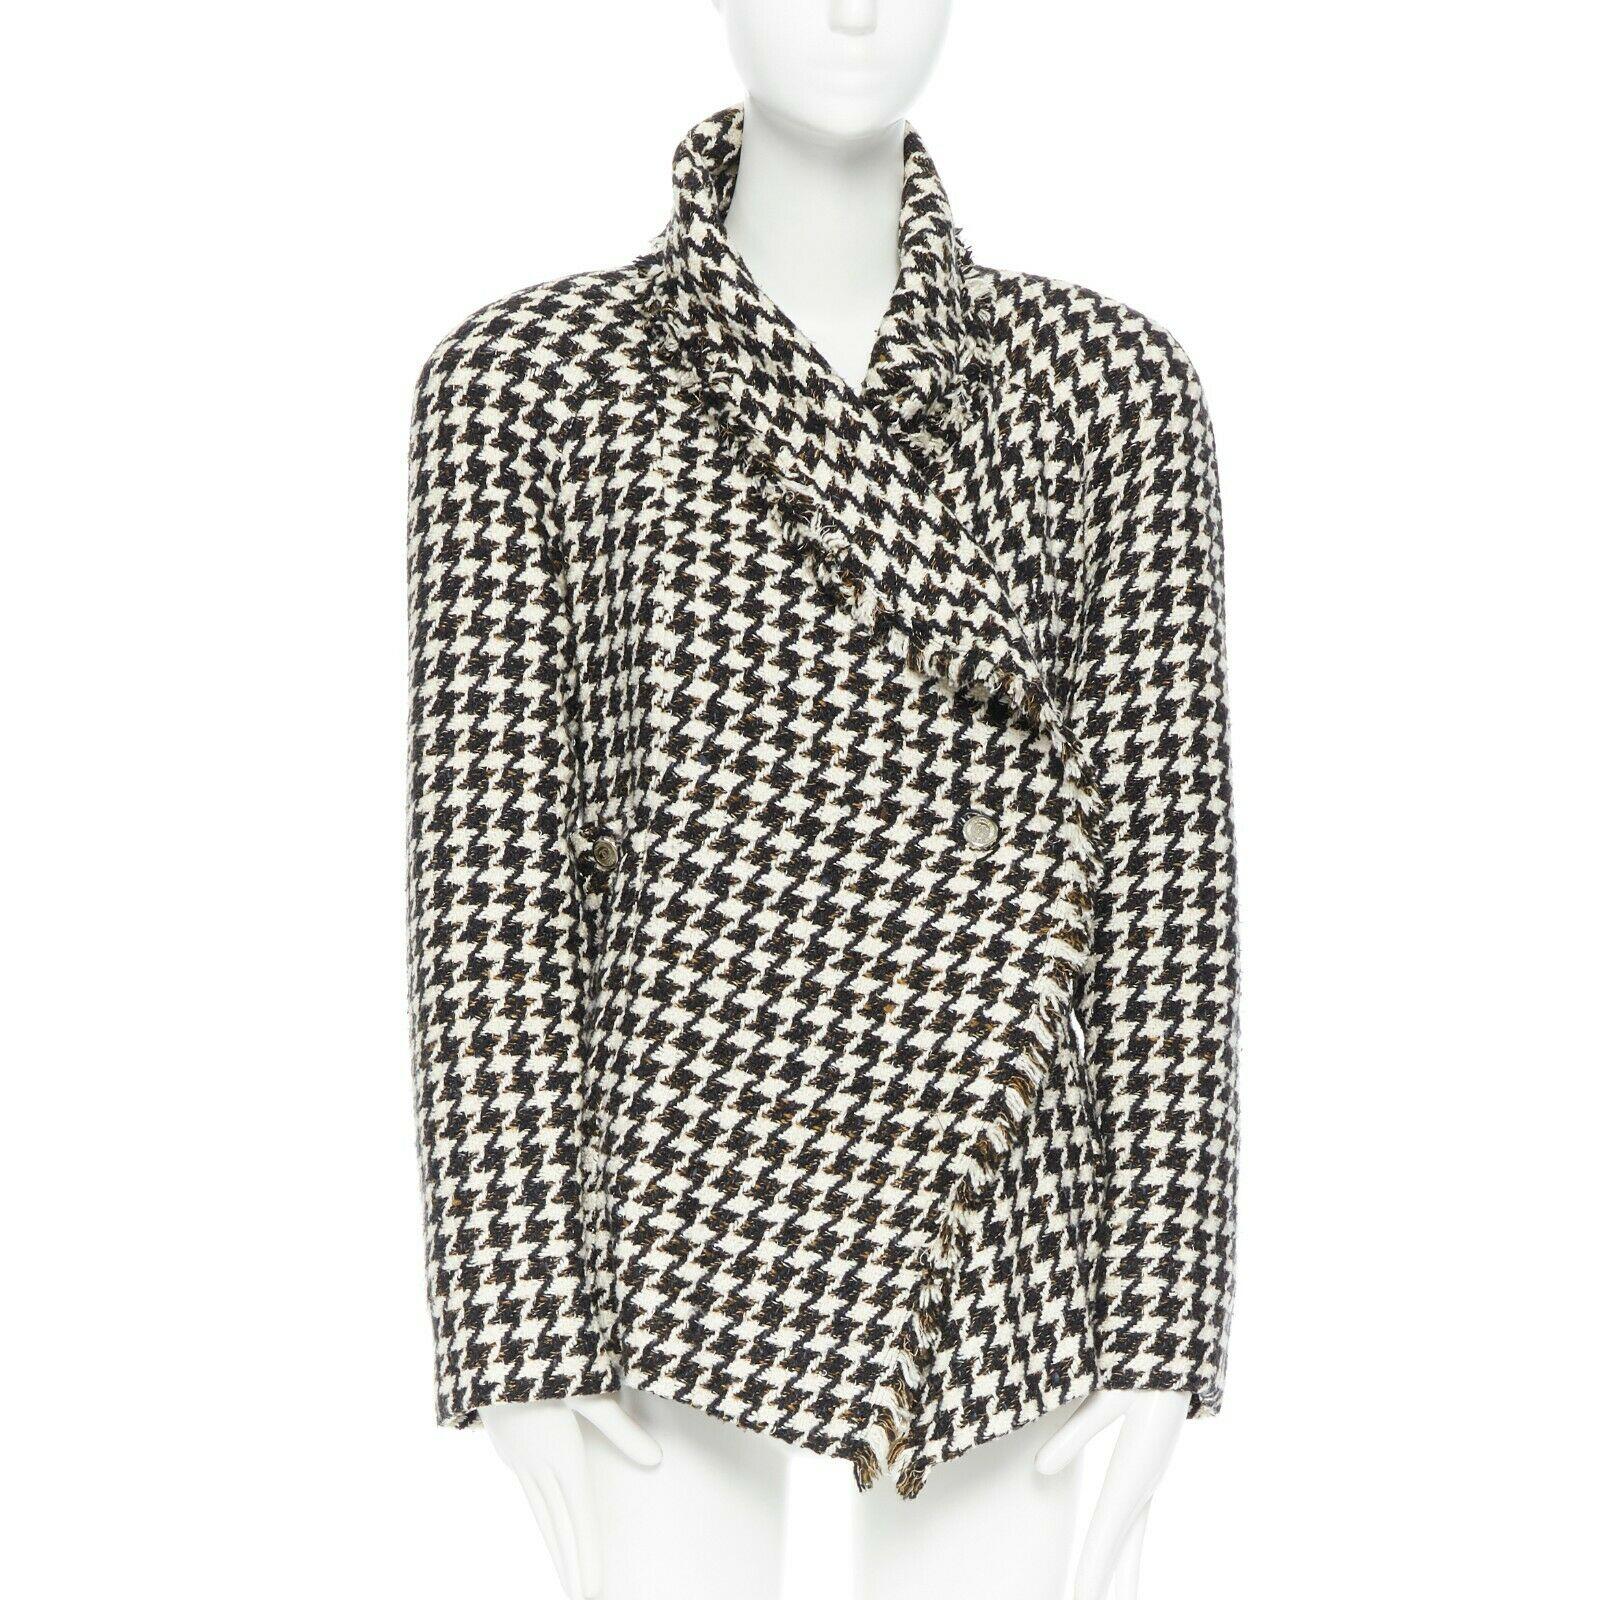 CHANEL 06P black white houndstooth tweed asymmetric wrapped front jacket FR40
Brand: CHANEL
Designer: Karl Lagerfeld
Collection: 06P
Model Name / Style: Tweed jacket
Material: Silk
Color: Black and cream
Pattern: Houndstooth
Closure: Button
Lining